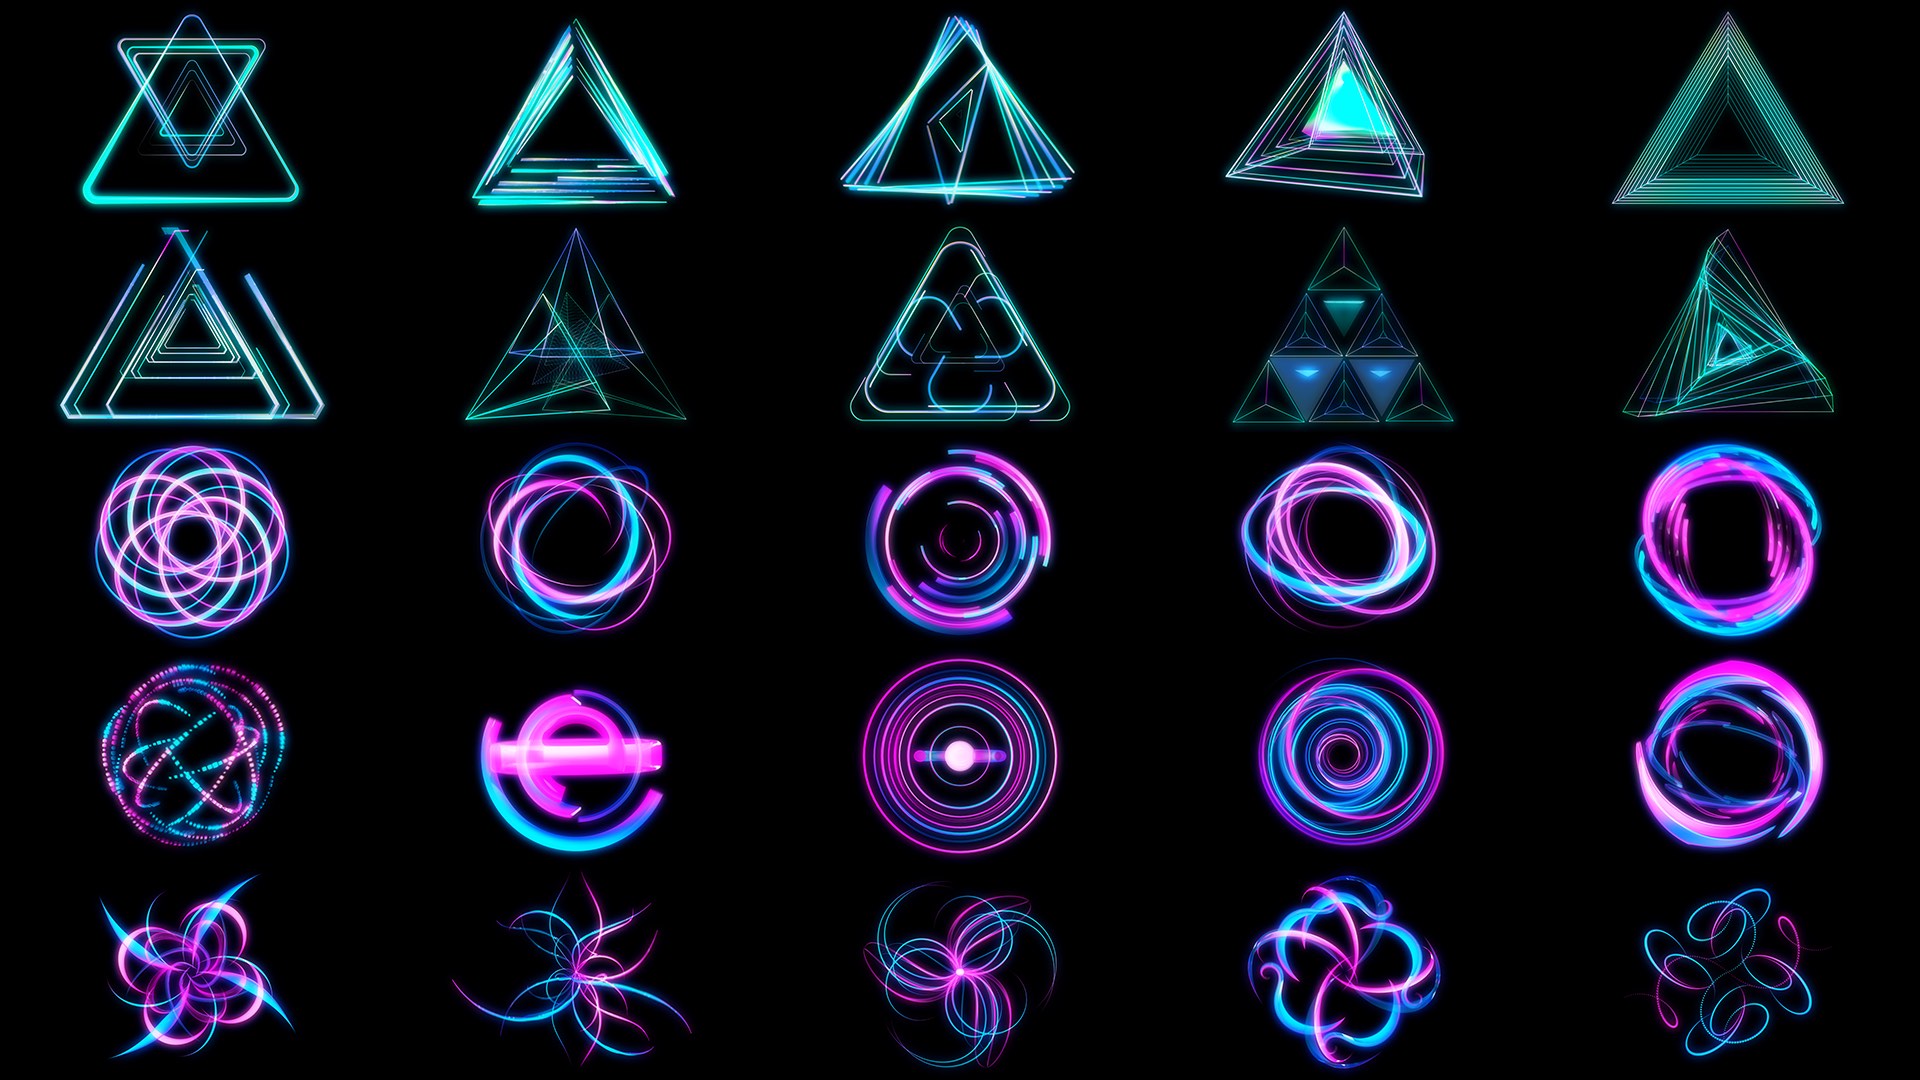 Set of VJ Loops for Live Visuals - Shapeshifters (HD)